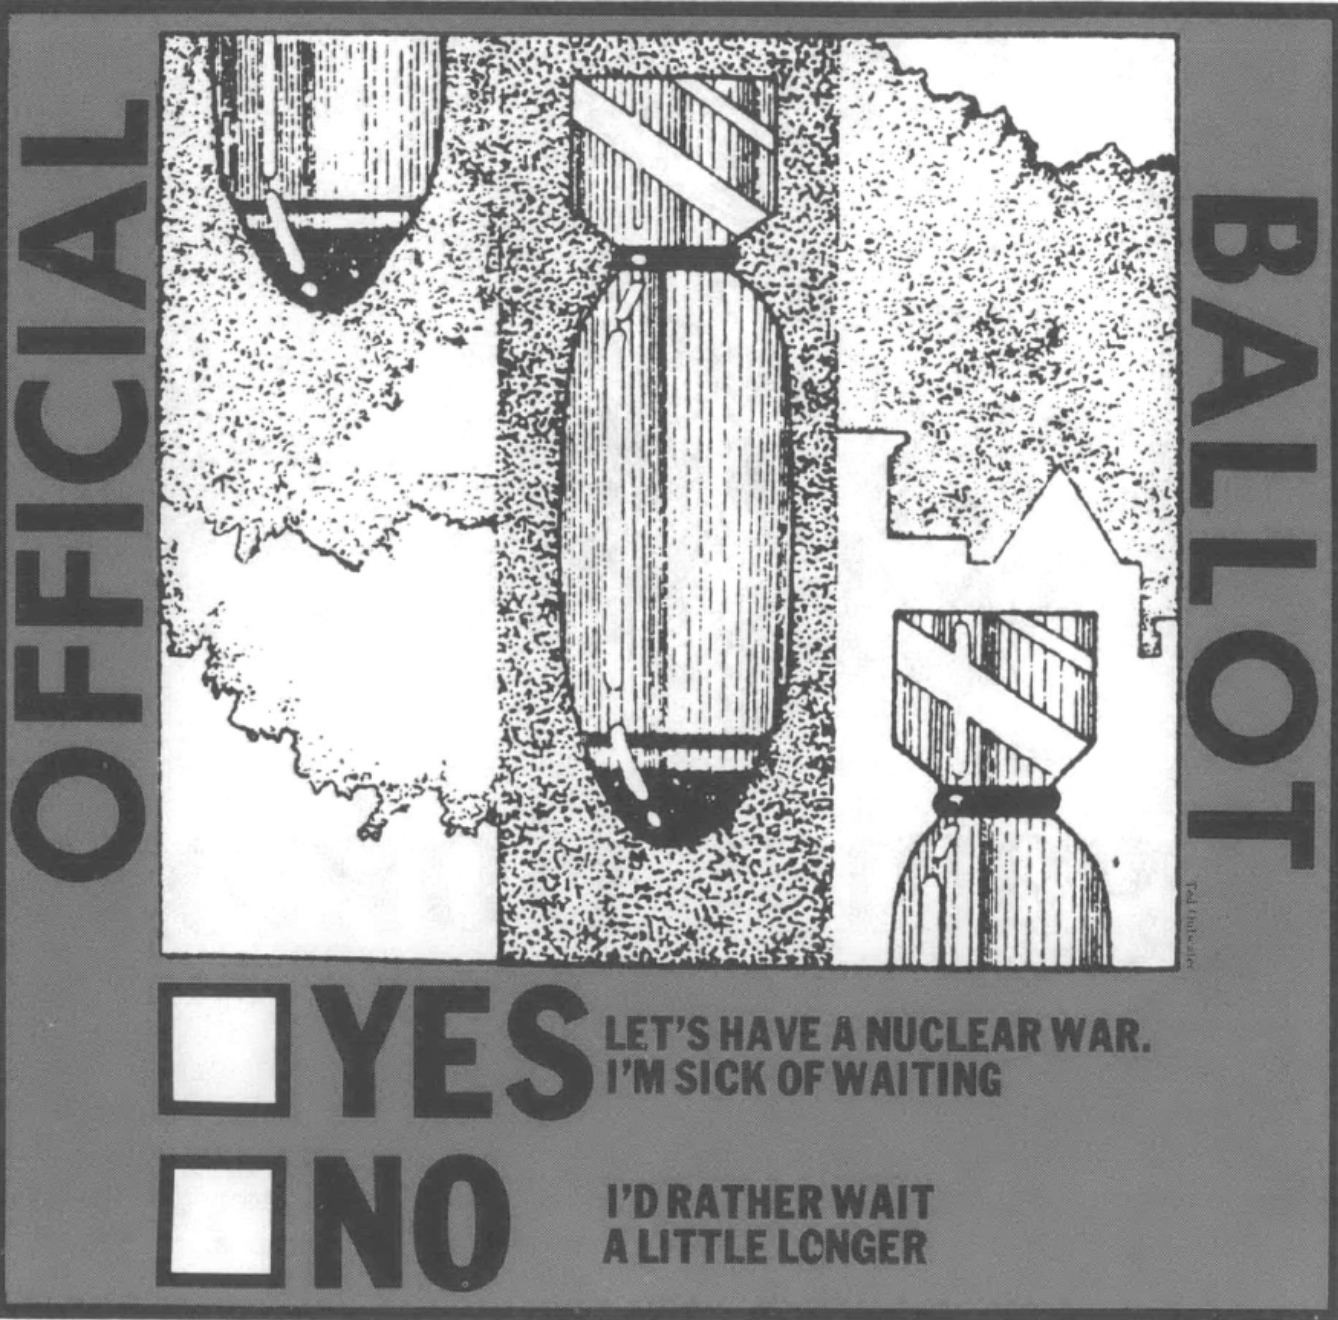 A bomb is pictured on a ballot above Yes and No boxes